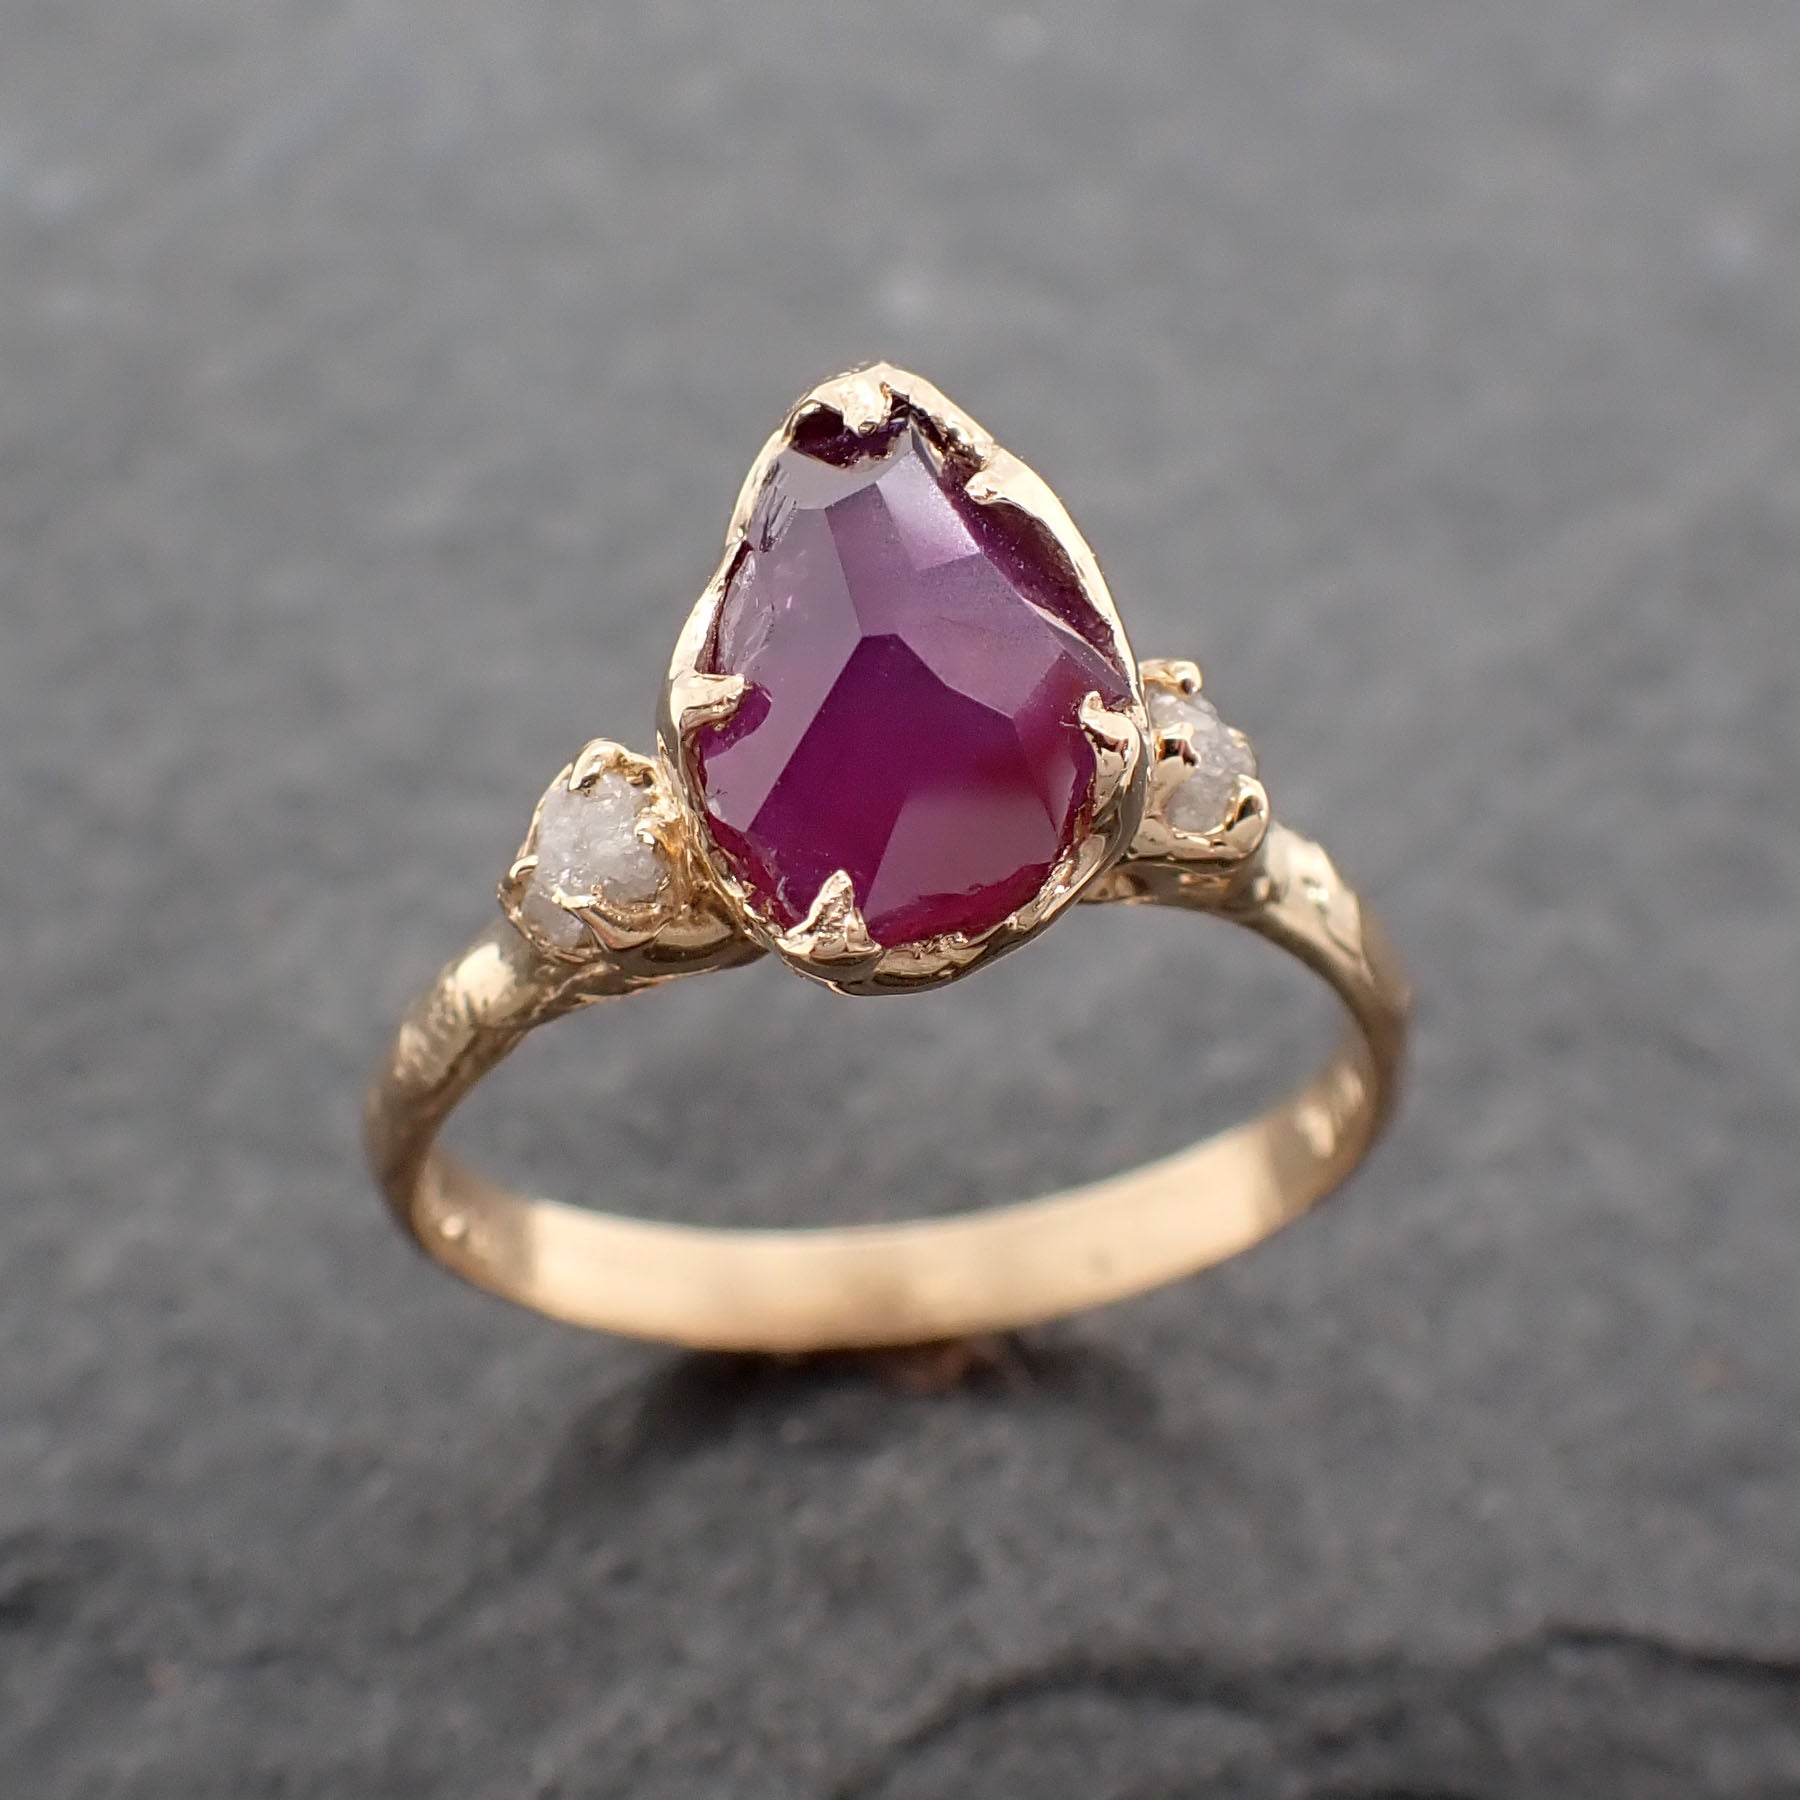 partially faceted sapphire gemstone raw rough diamond 18k yellow gold engagement ring multi stone 2437 Alternative Engagement